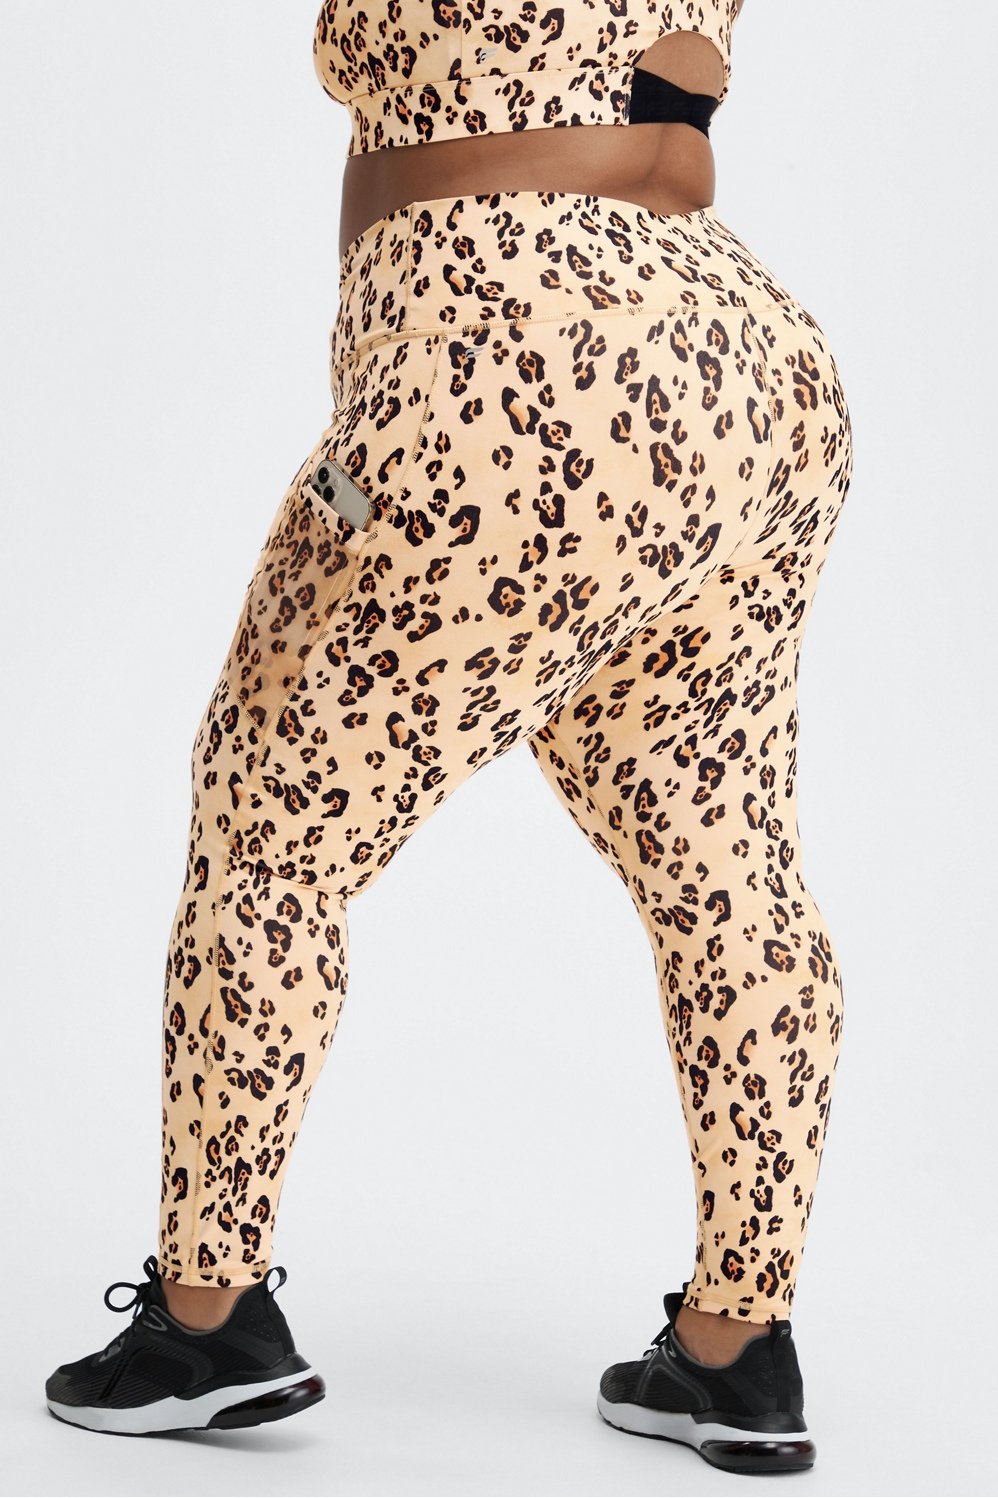 BEST FABLETICS LEGGING / ON-THE-GO LEOPARD PRINT HIGH WAISTED LEGGING TRY  ON REVIEW 